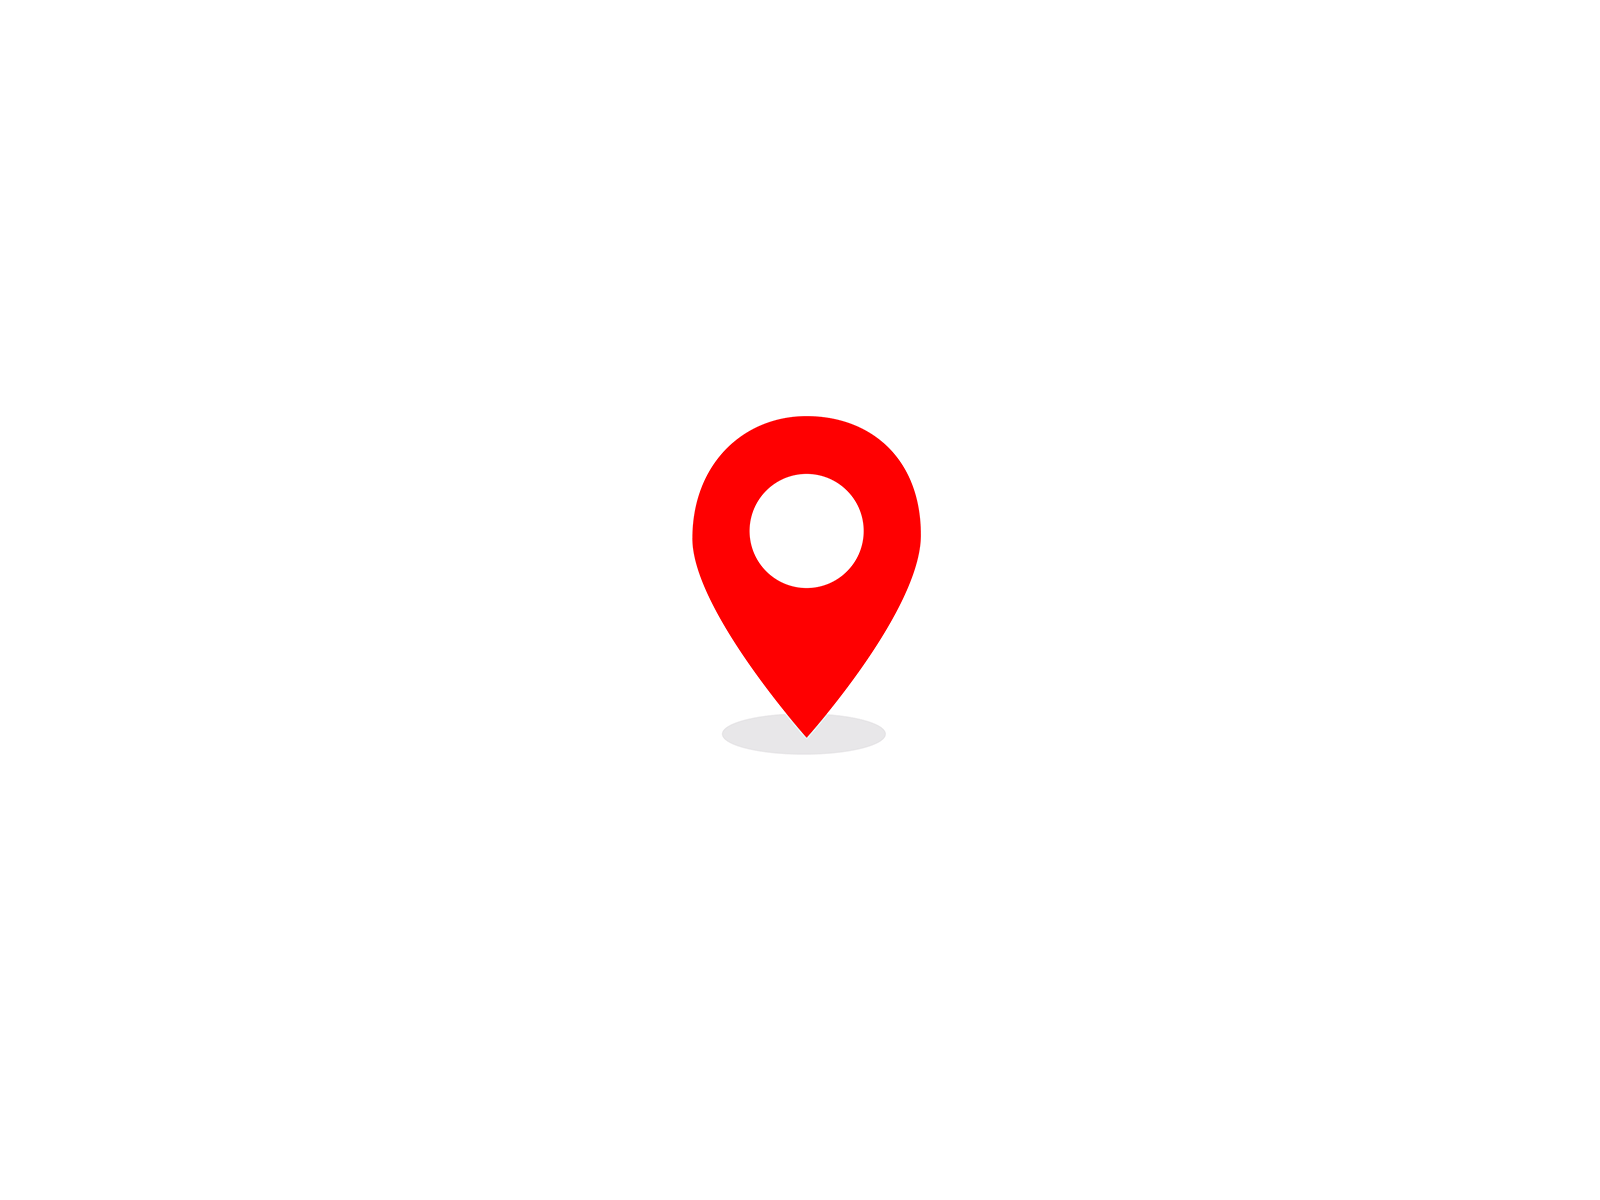 Animated location icon by Evgeniy Zimin on Dribbble